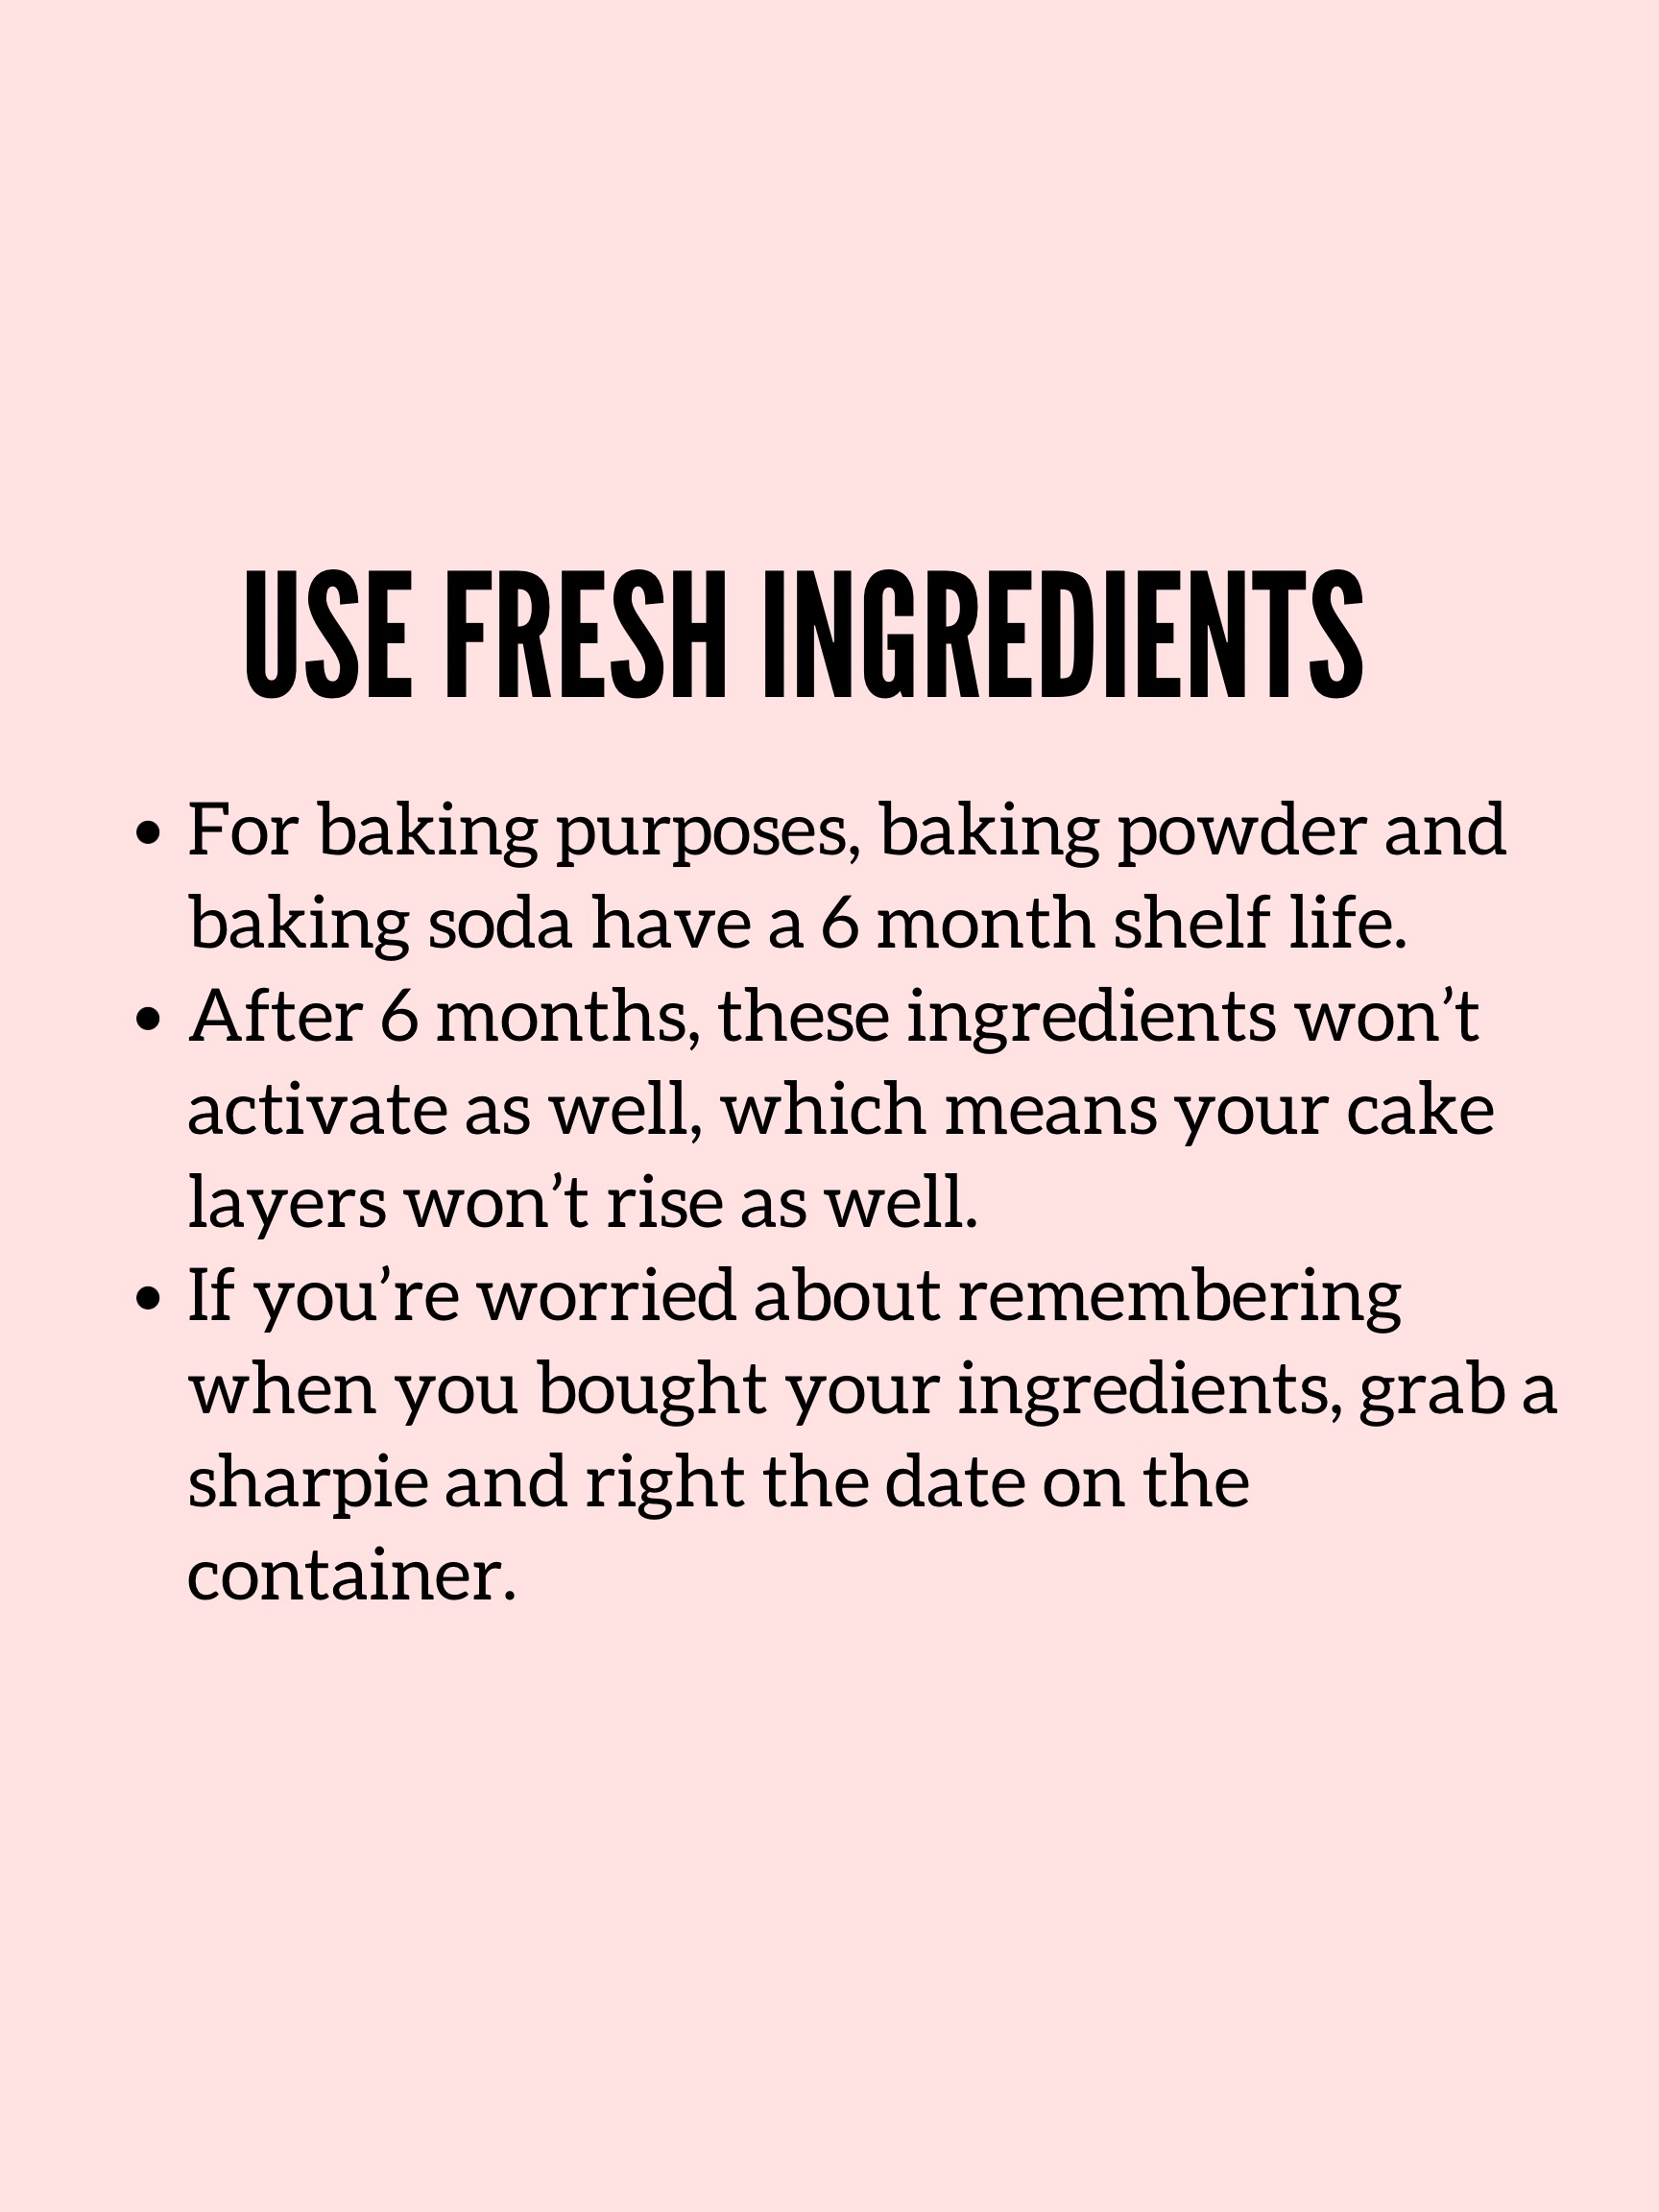 For tall cake layers, make sure to use fresh ingredients. 